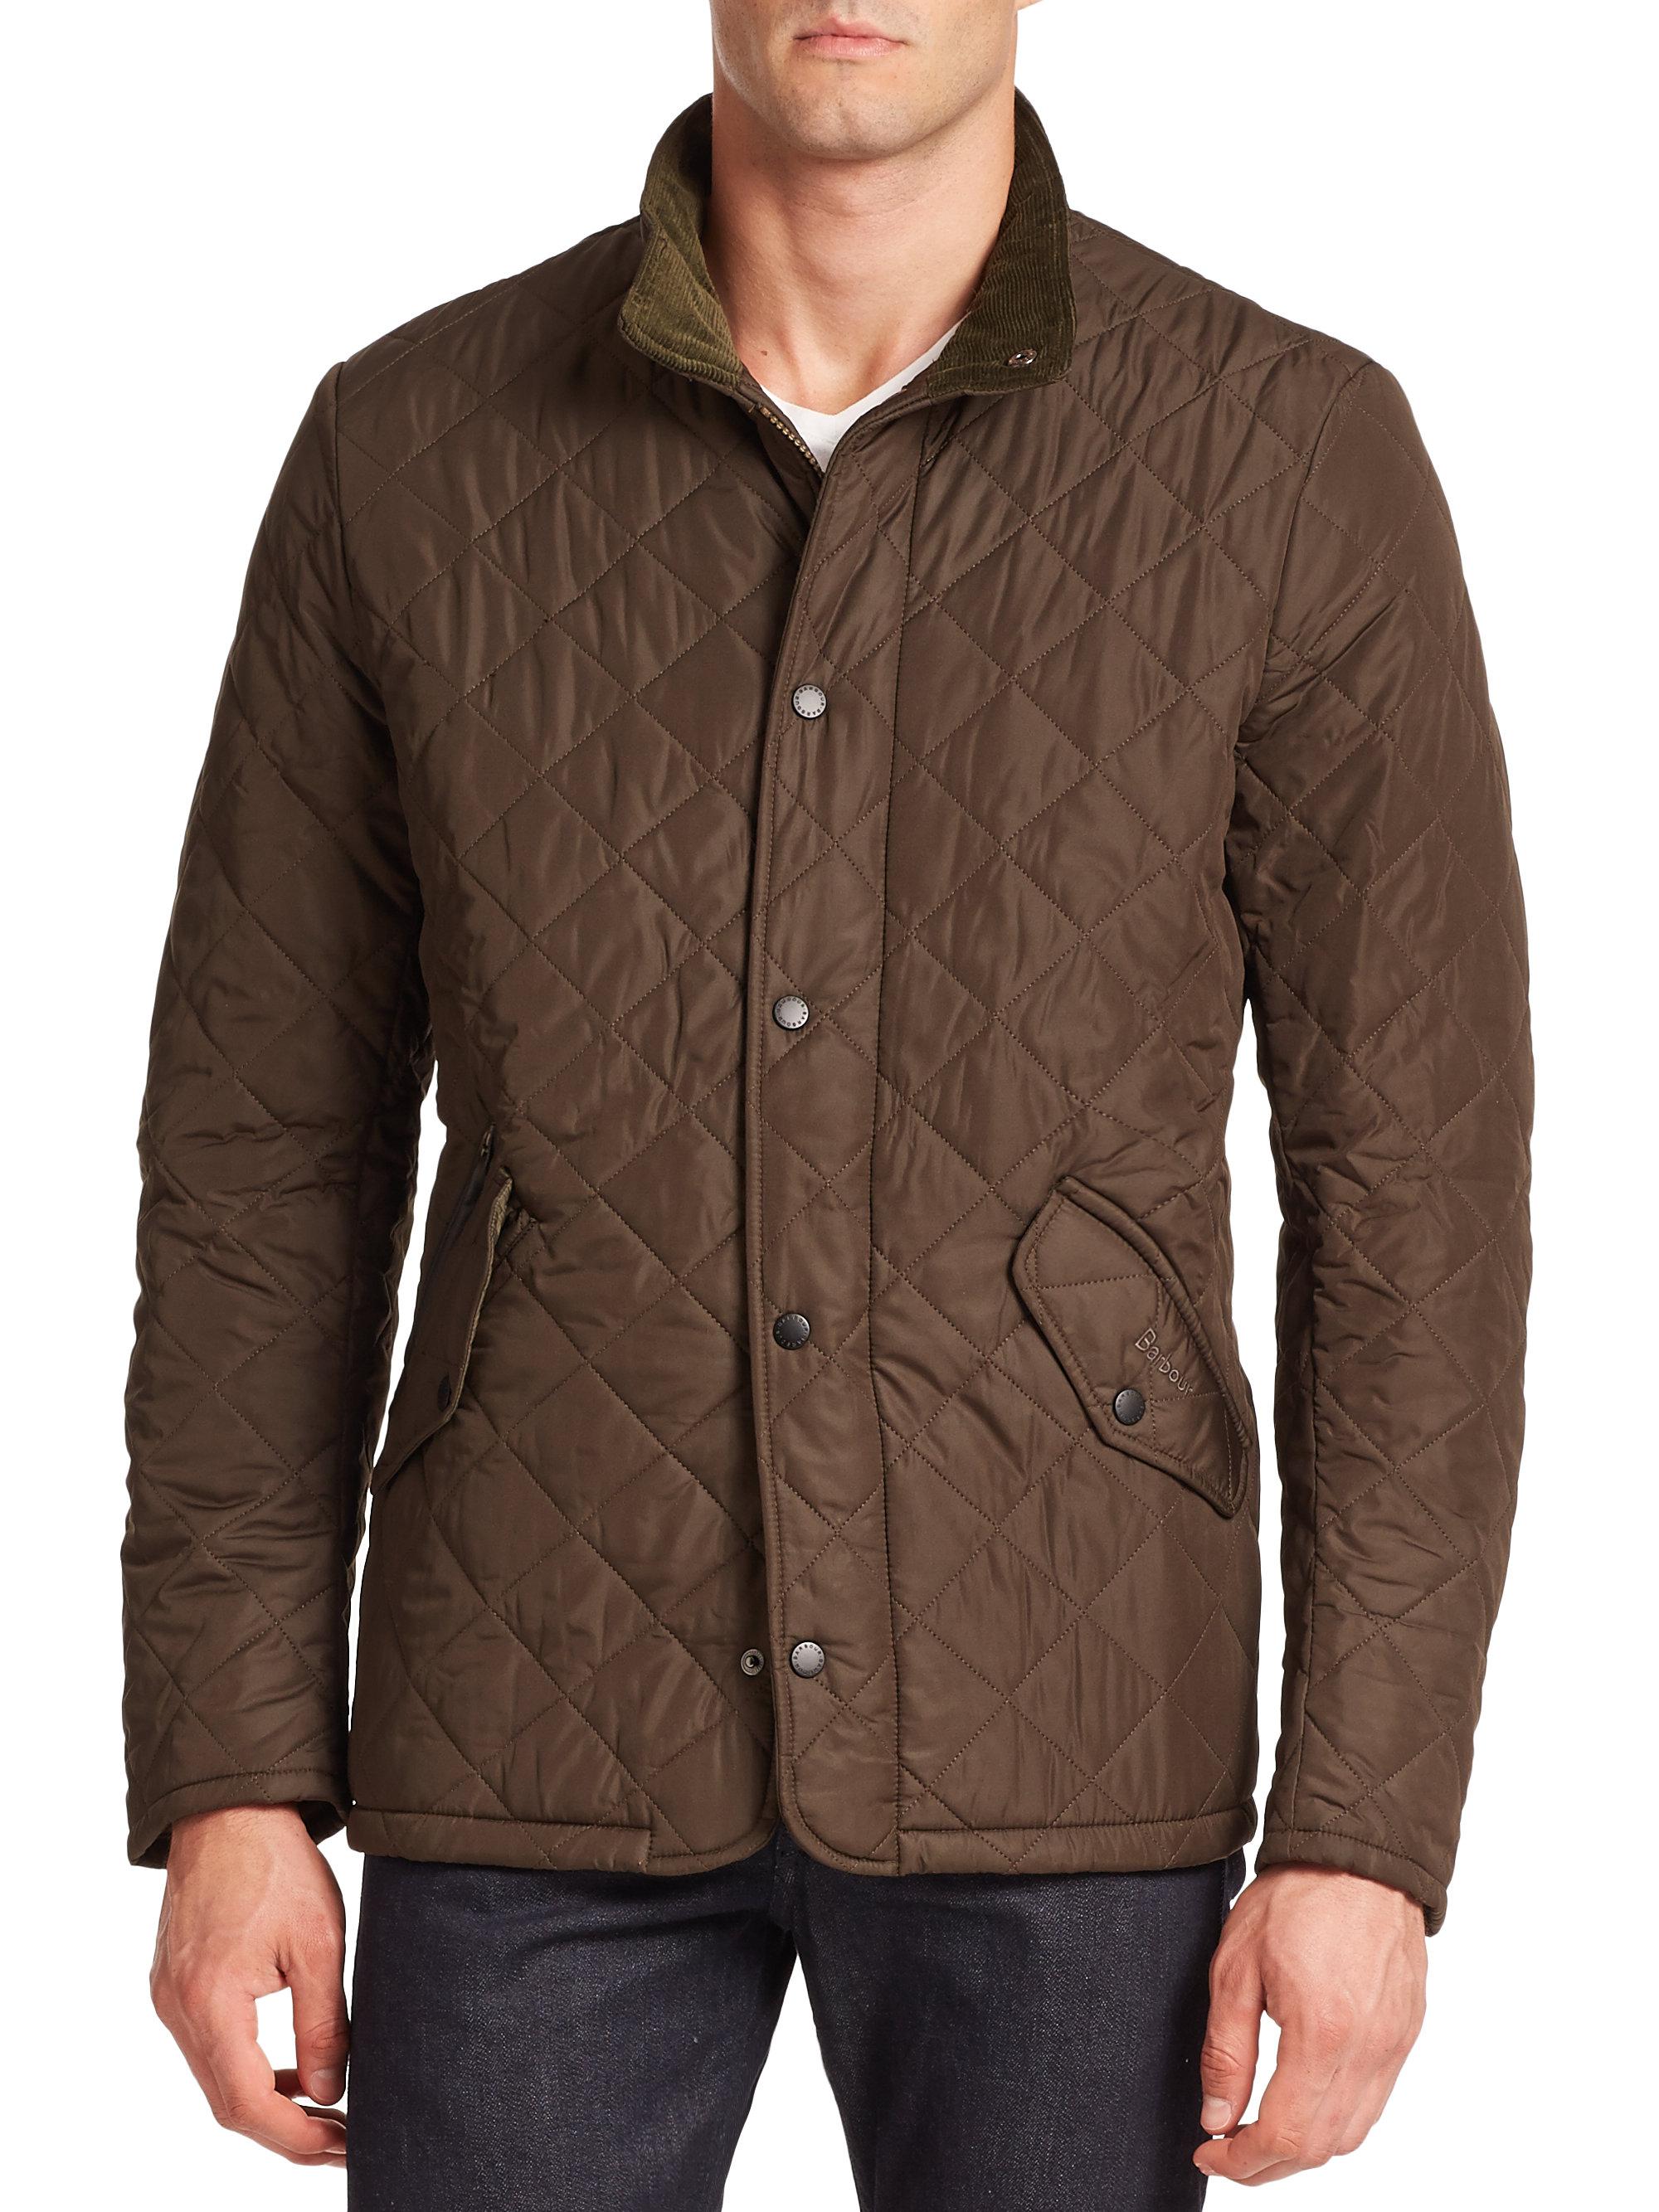 Barbour Chelsea Quilted Sports Jacket in Olive (Brown) for Men - Lyst